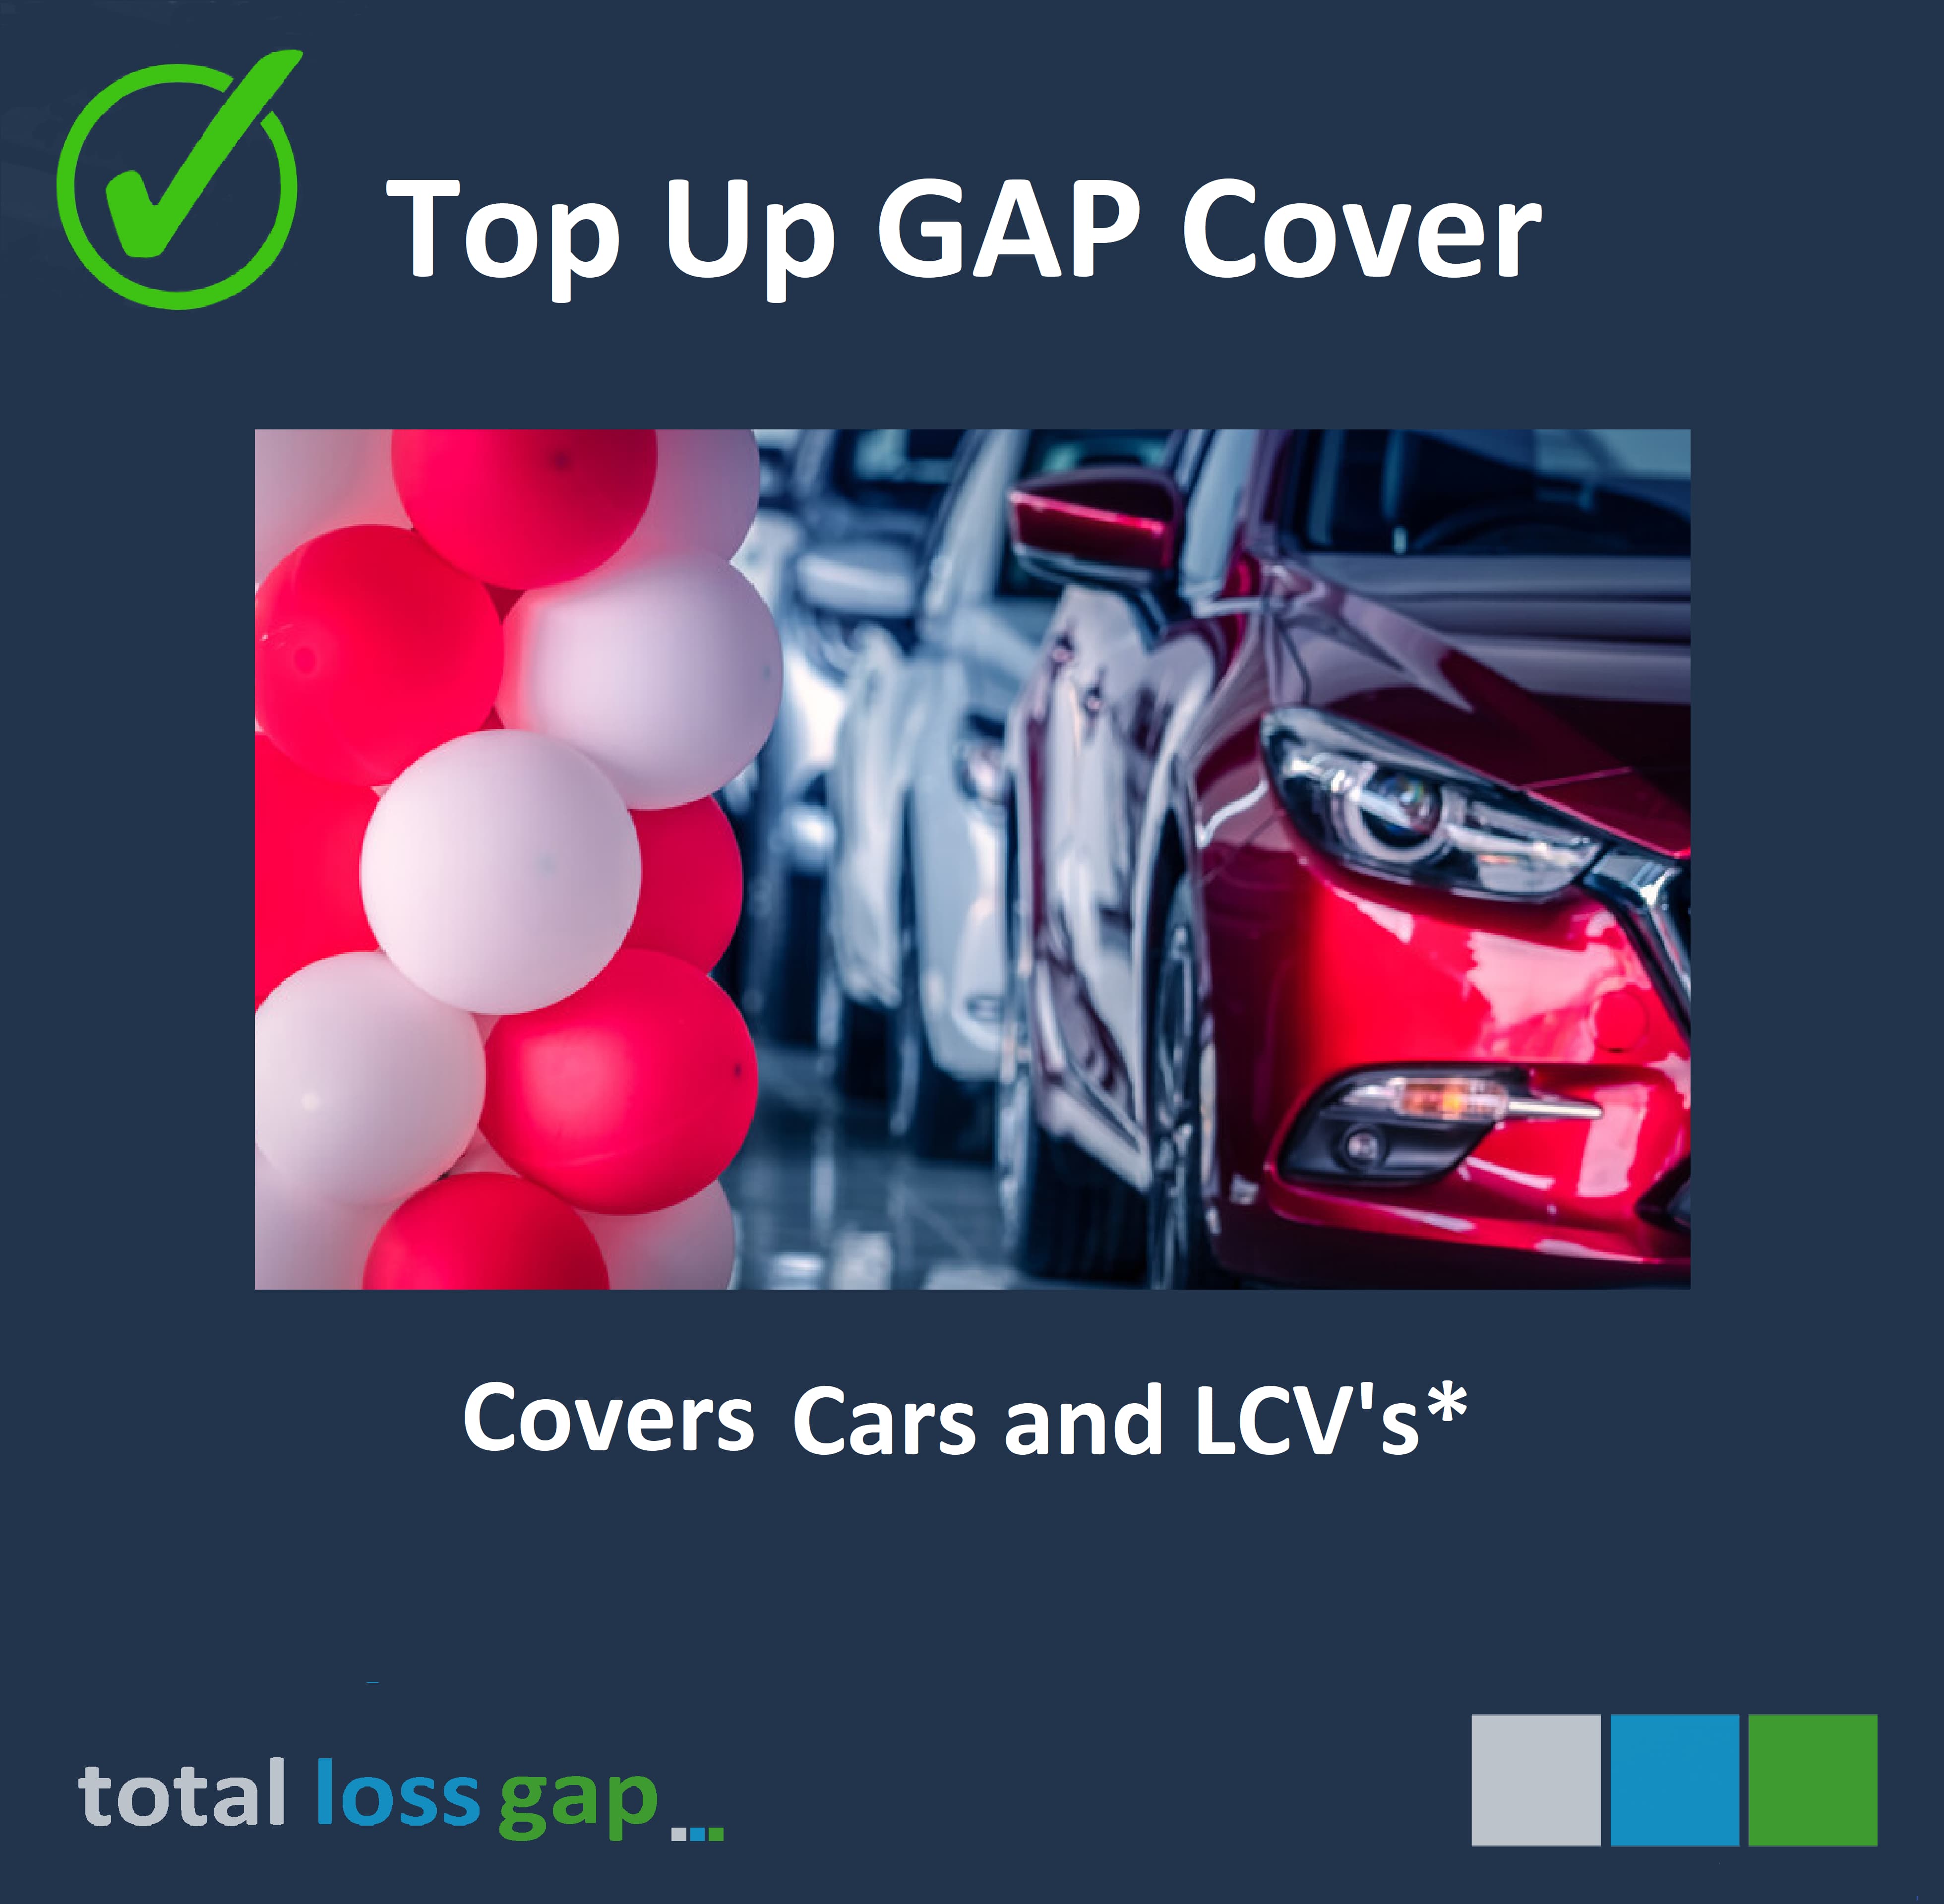 Top up Gap Cover for Vans and LCV's